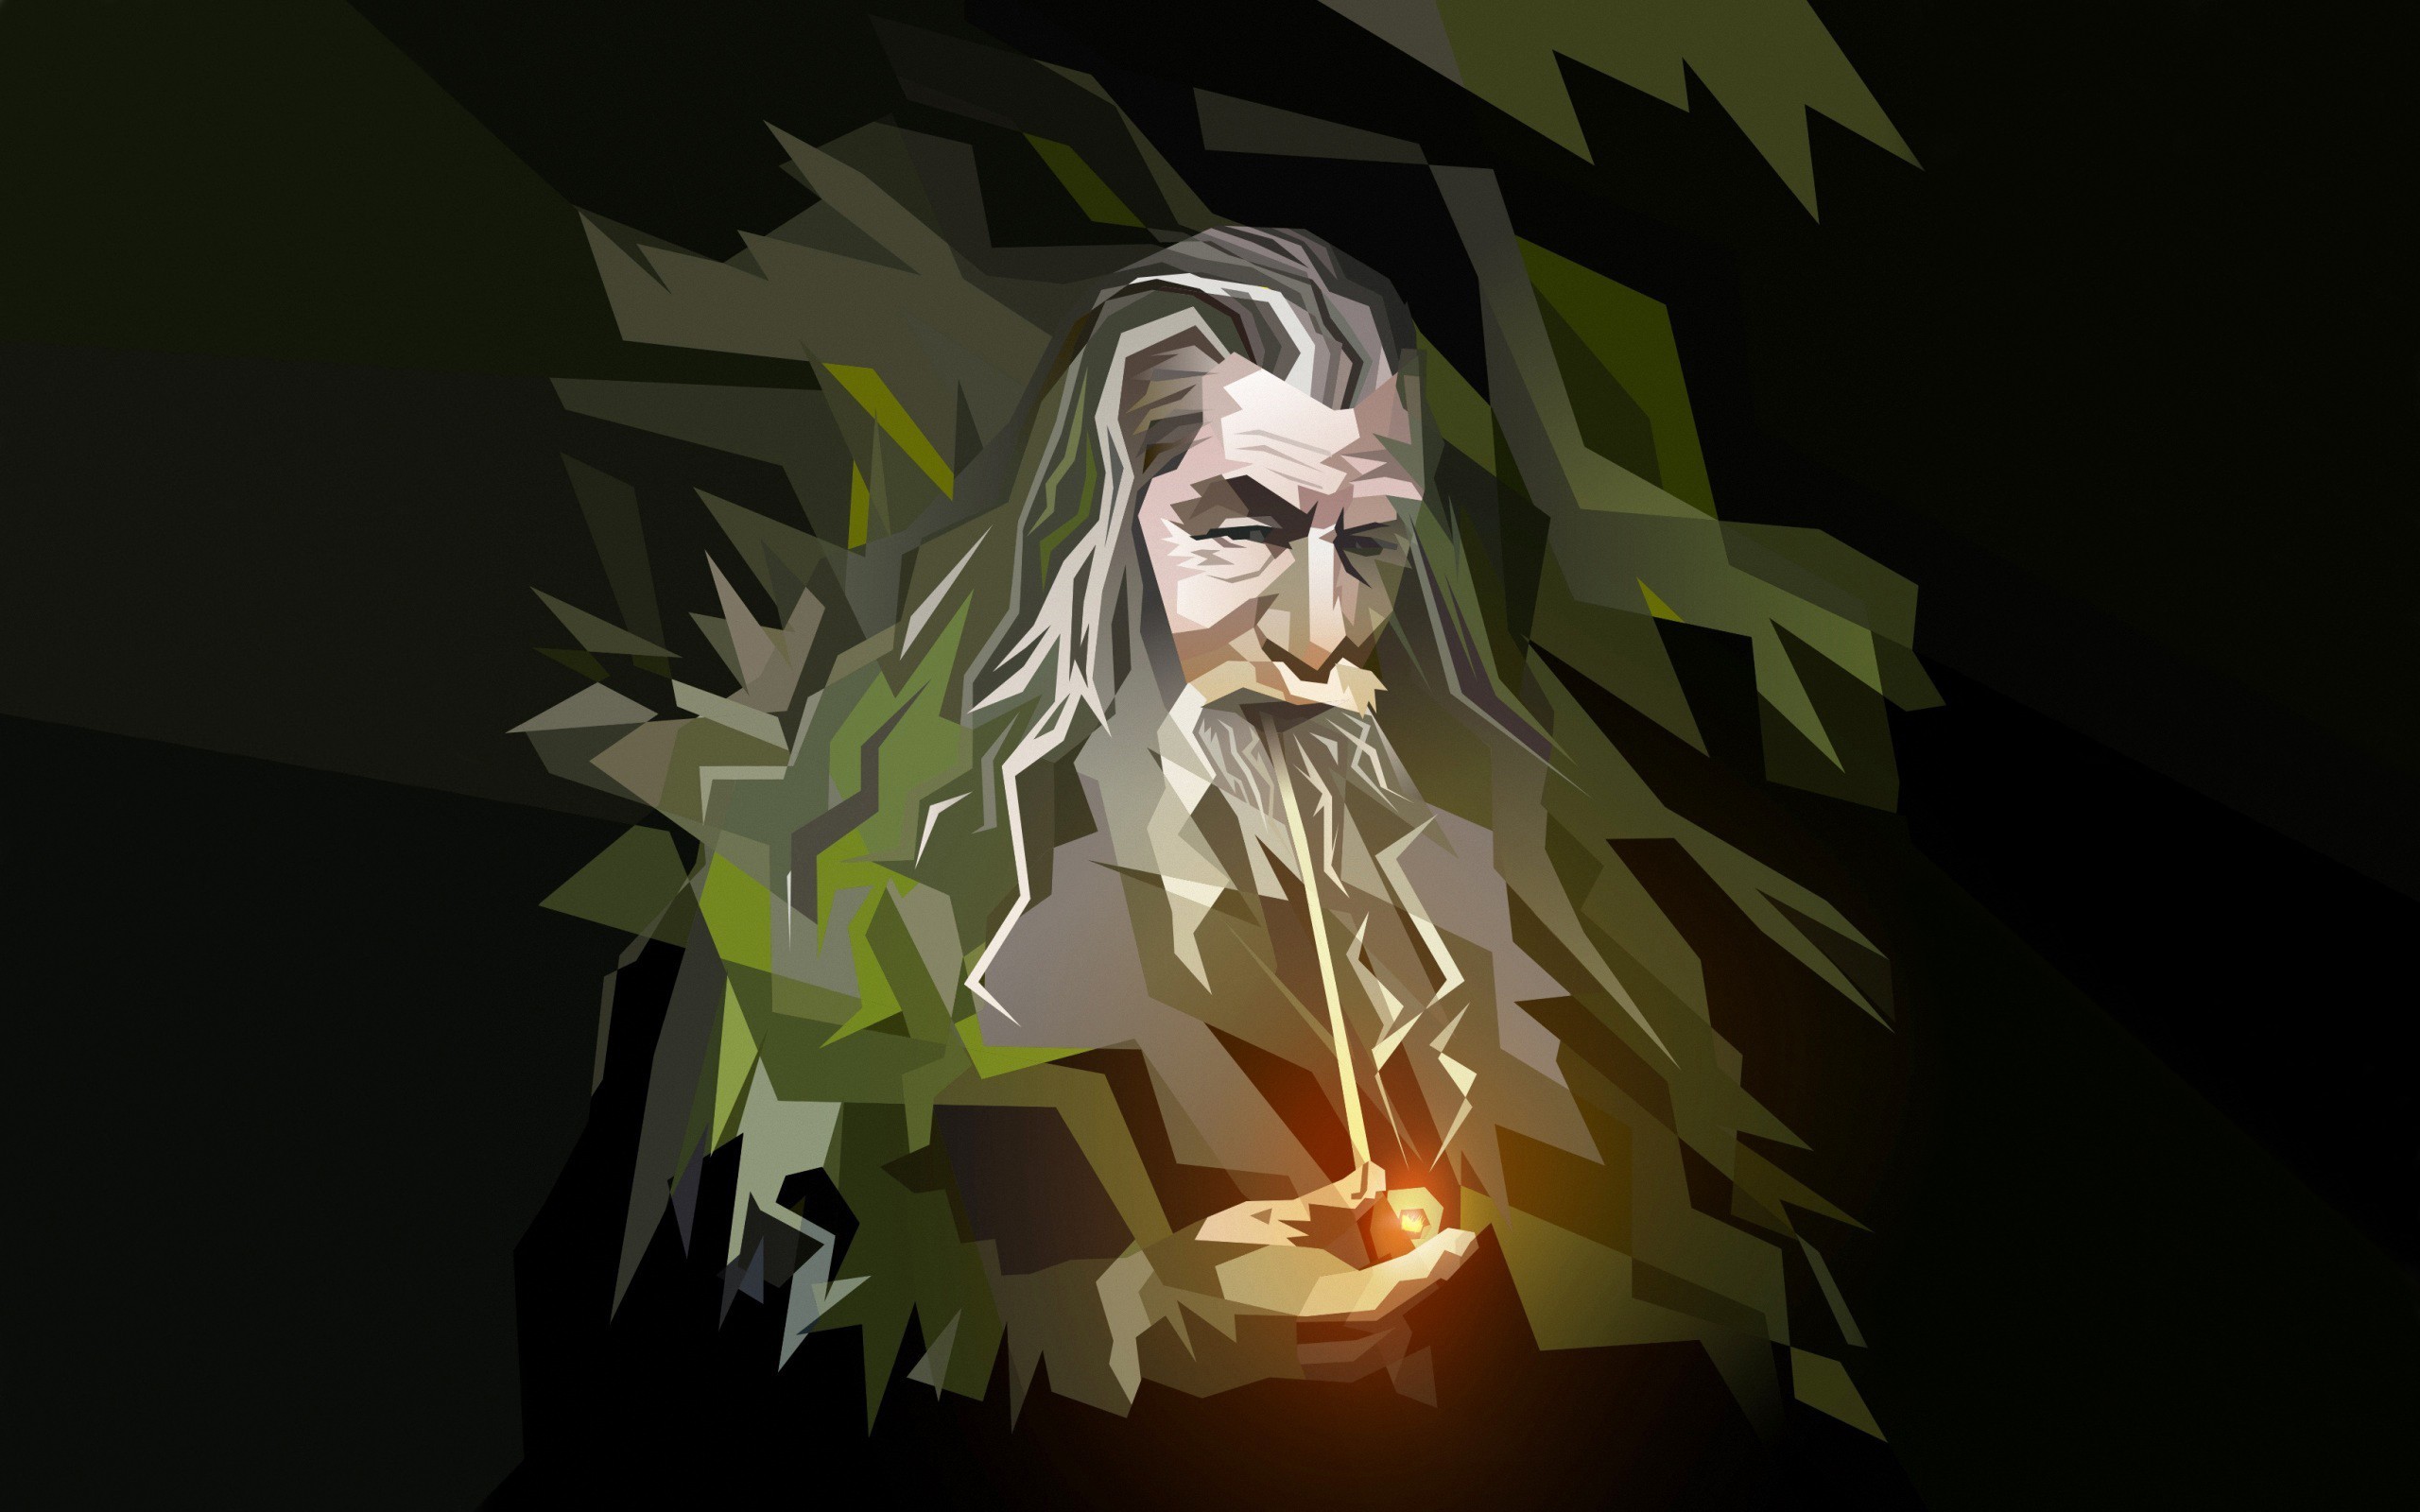 General 2560x1600 low poly pipes wizard The Lord of the Rings fantasy art artwork smoking fantasy men digital art vector simple background